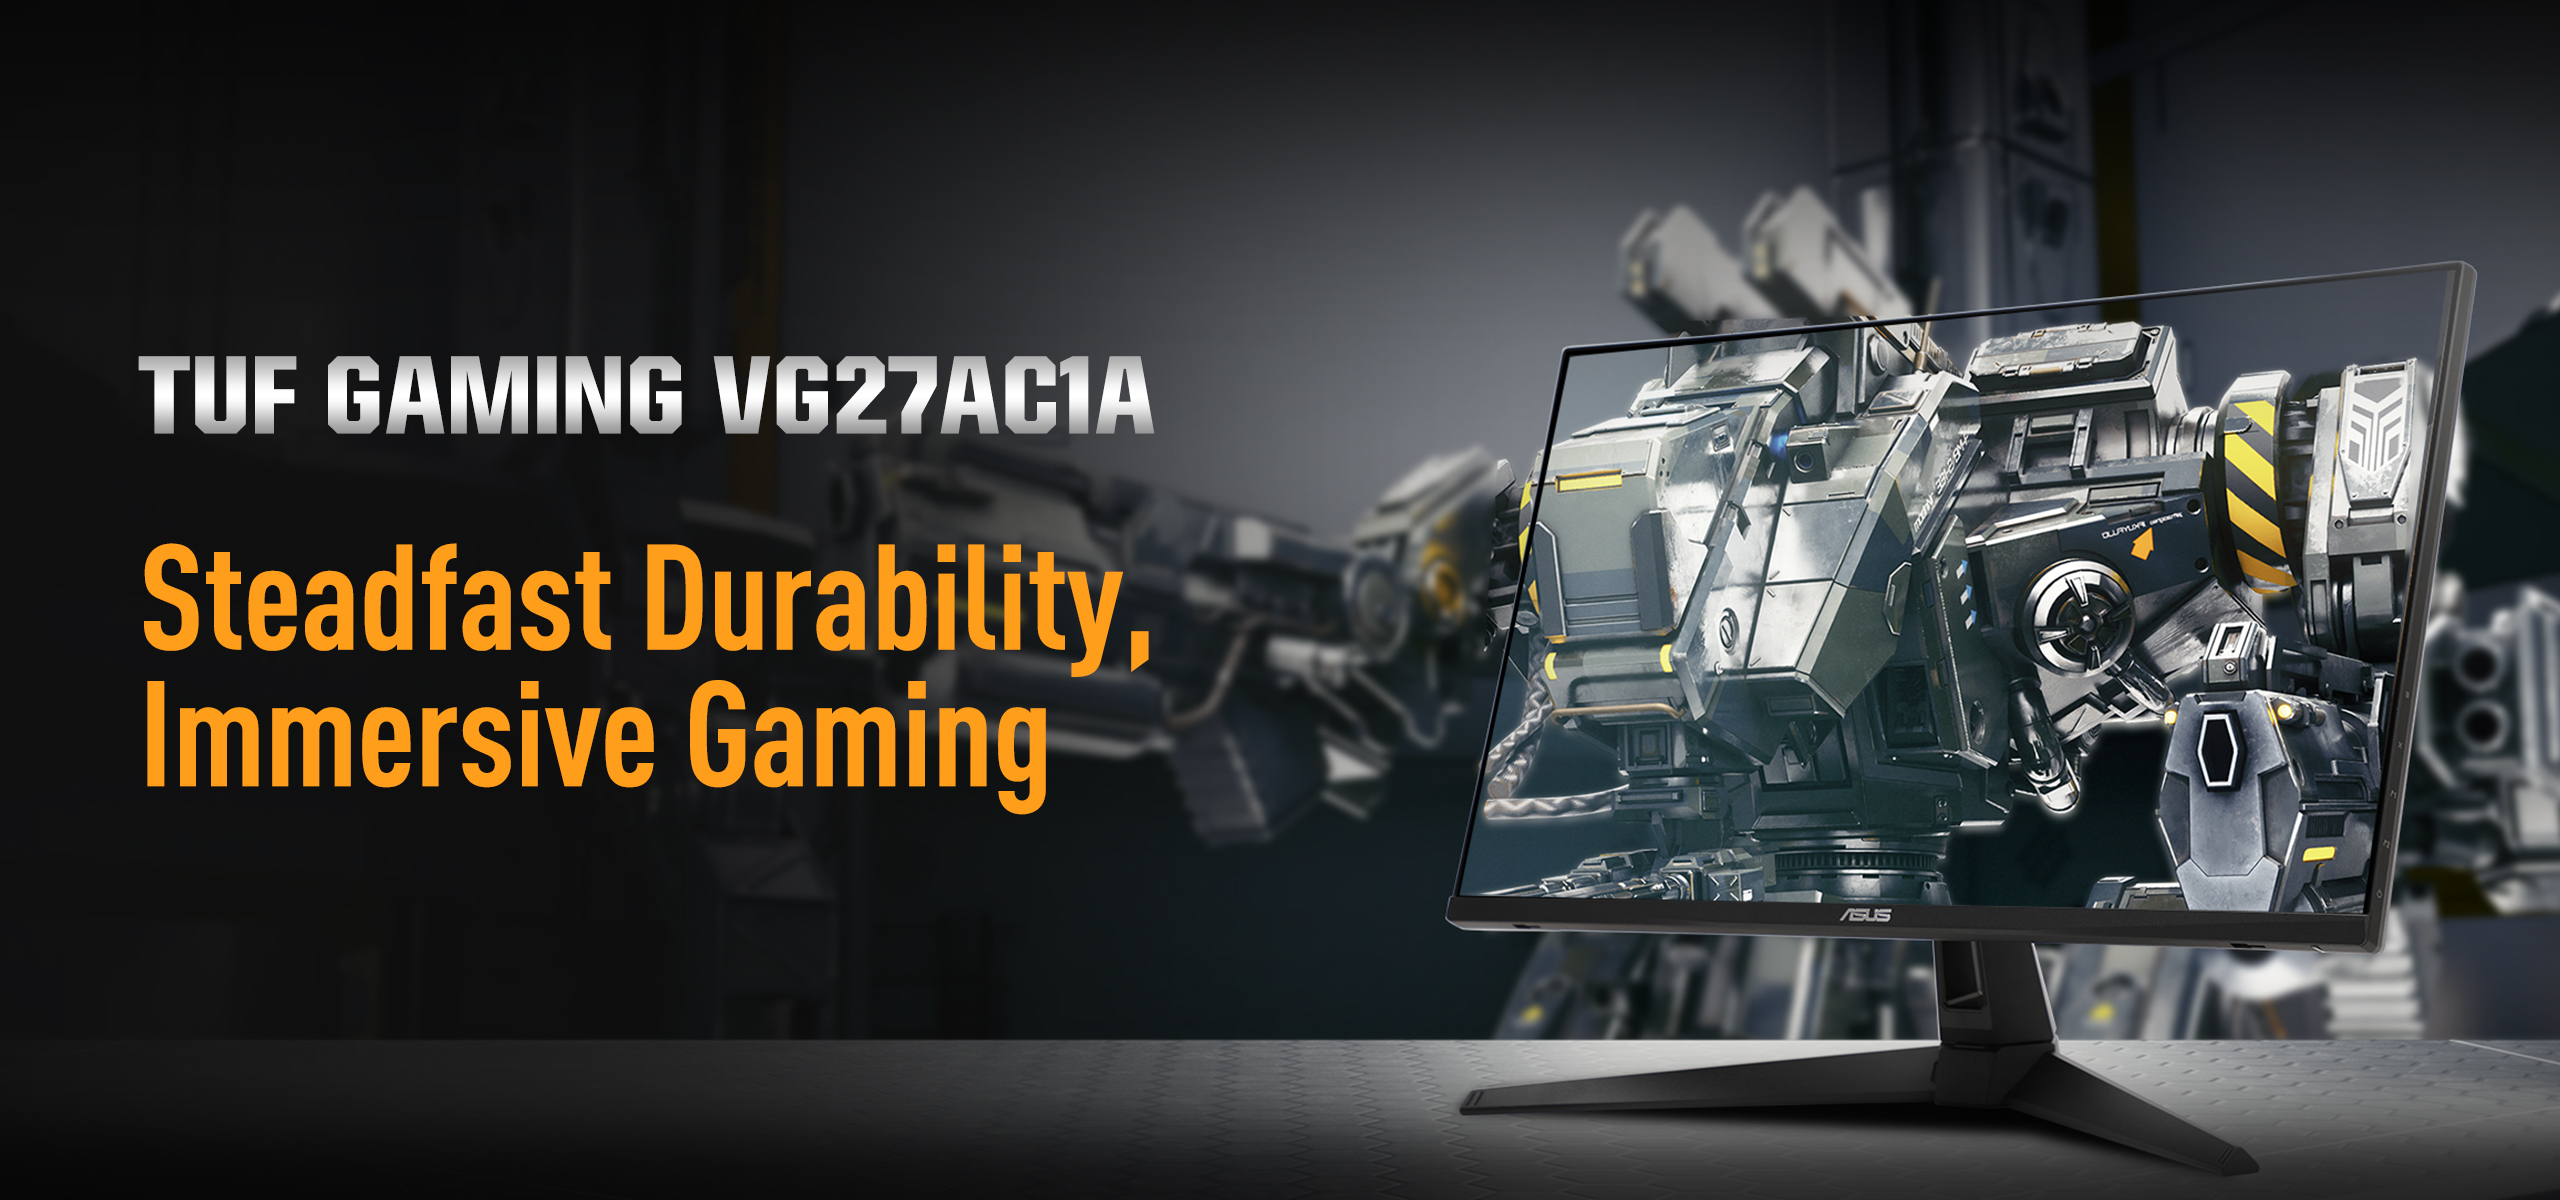 Key selling features of VG27AC1A